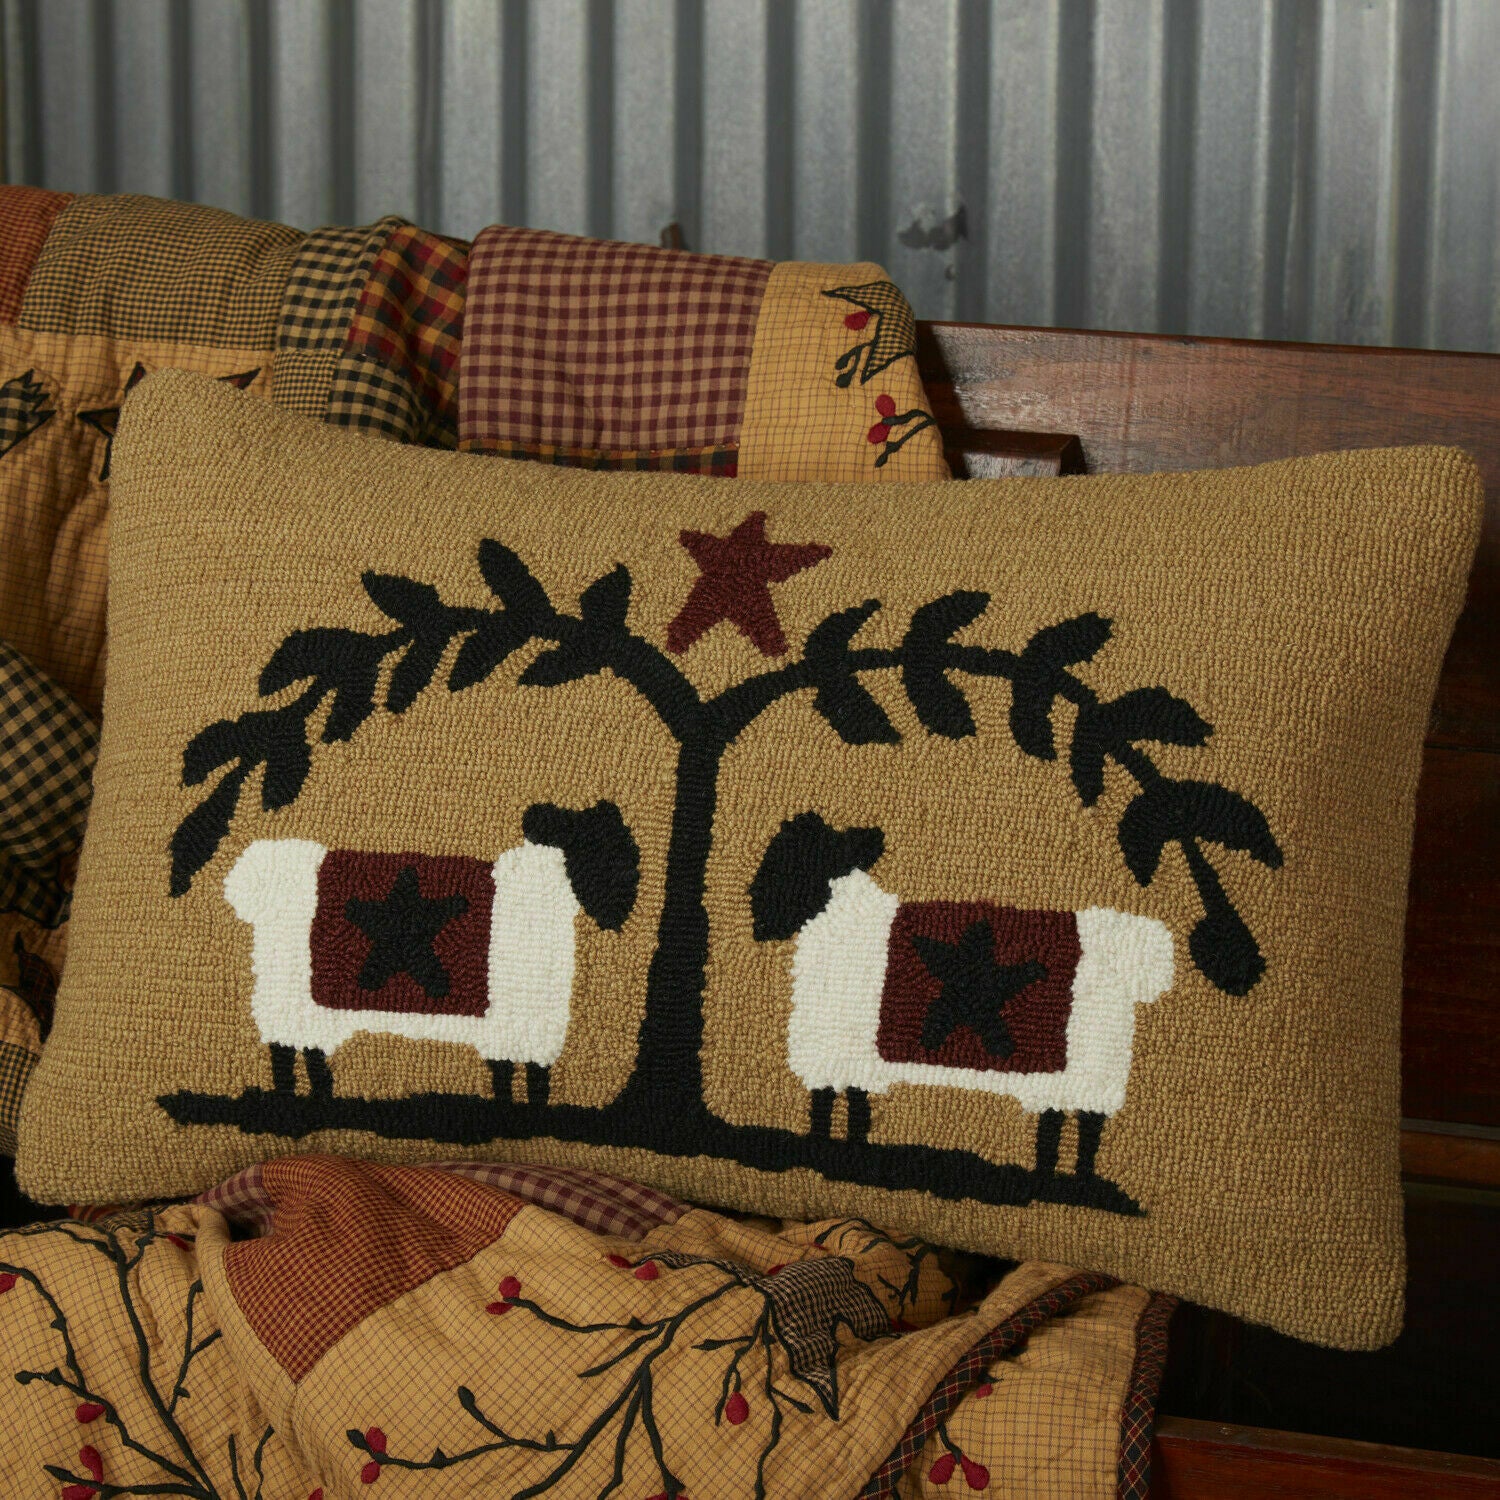 Primitive/Country Heritage Farms Sheep and Star Hooked Pillow 14x22 - The Primitive Pineapple Collection